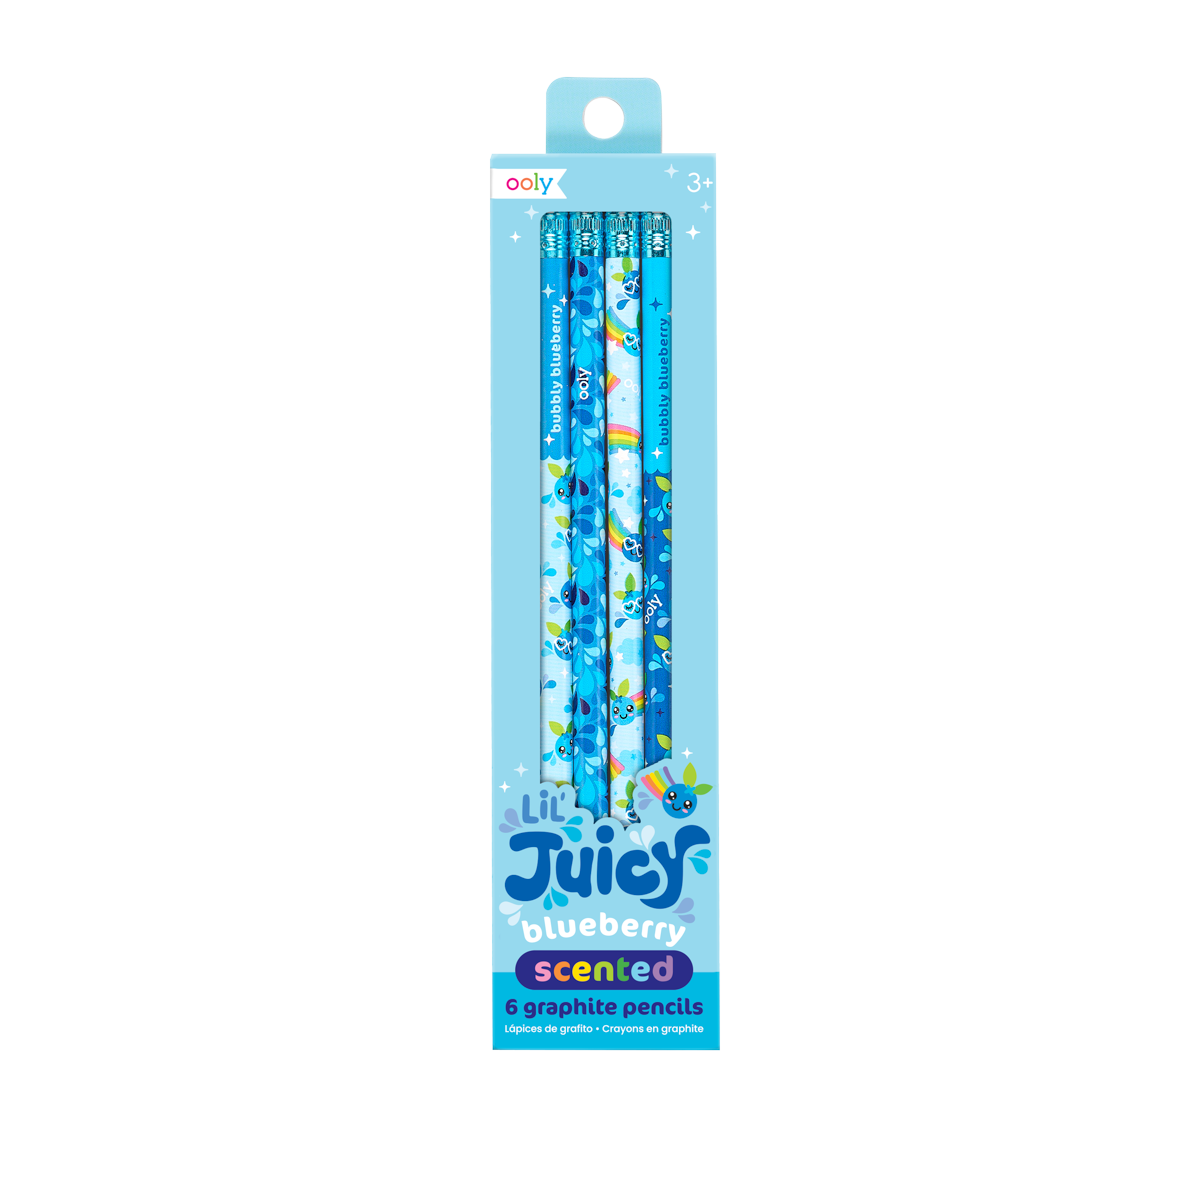 OOLY Lil Juicy Scented Graphite Pencils Blueberry in packaging